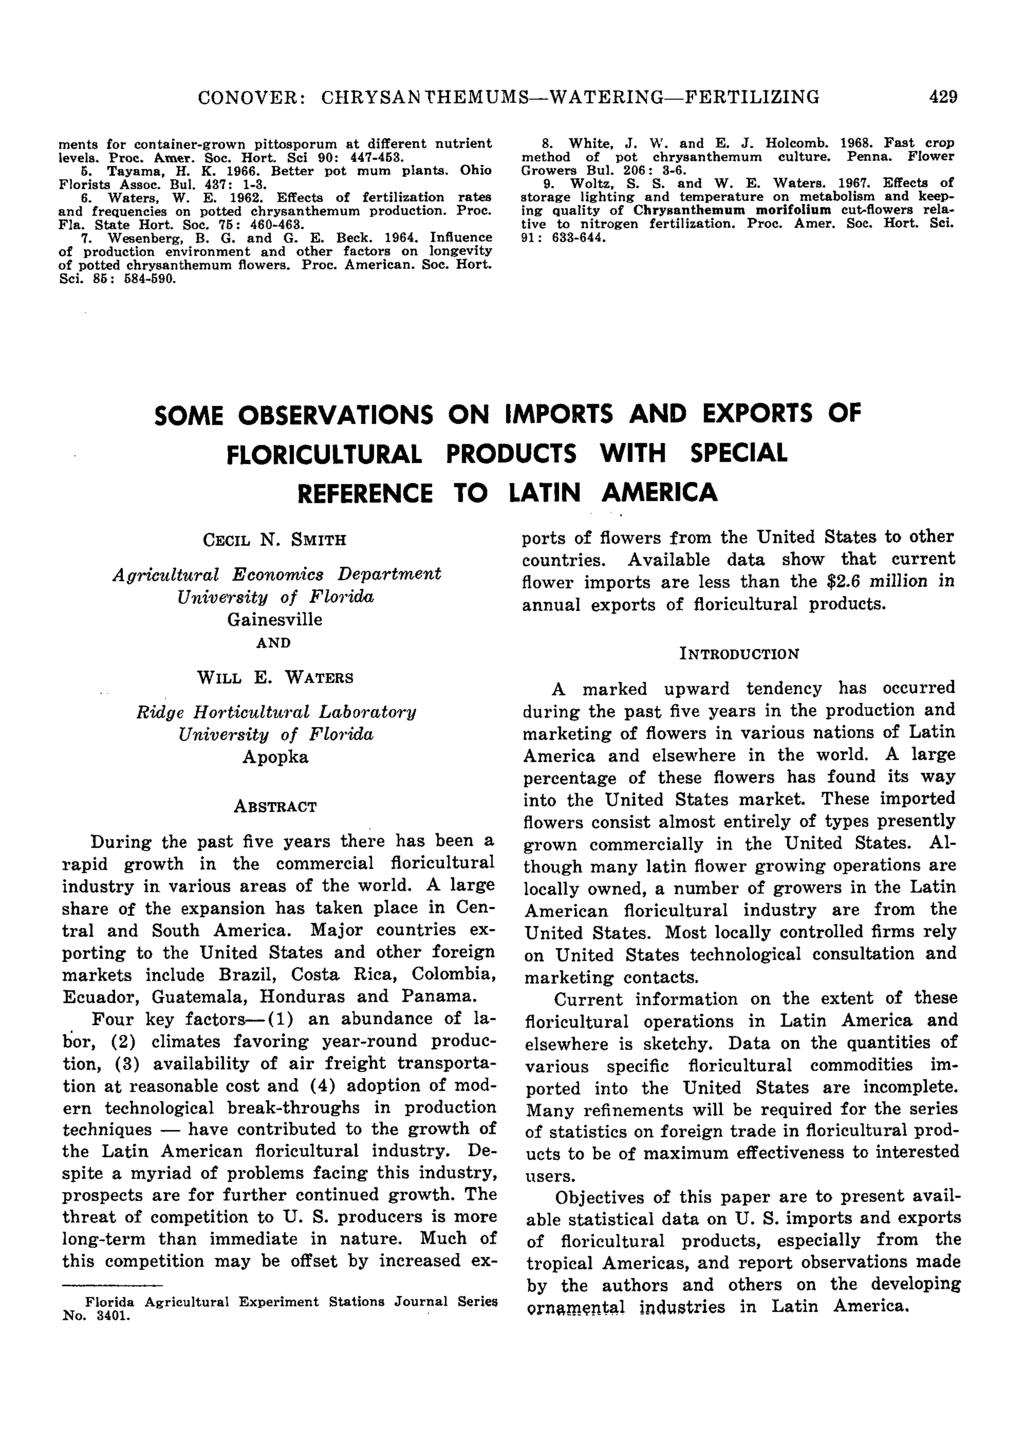 CONOVER: CHRYSAN THEMUMS WATERING FERTILIZING 429 ments for container-grown pittosporum at different nutrient levels. Proc. A.mer. Soc. Hort. Sci 90: 447-453. 5. Tayama, H. K. 1966.